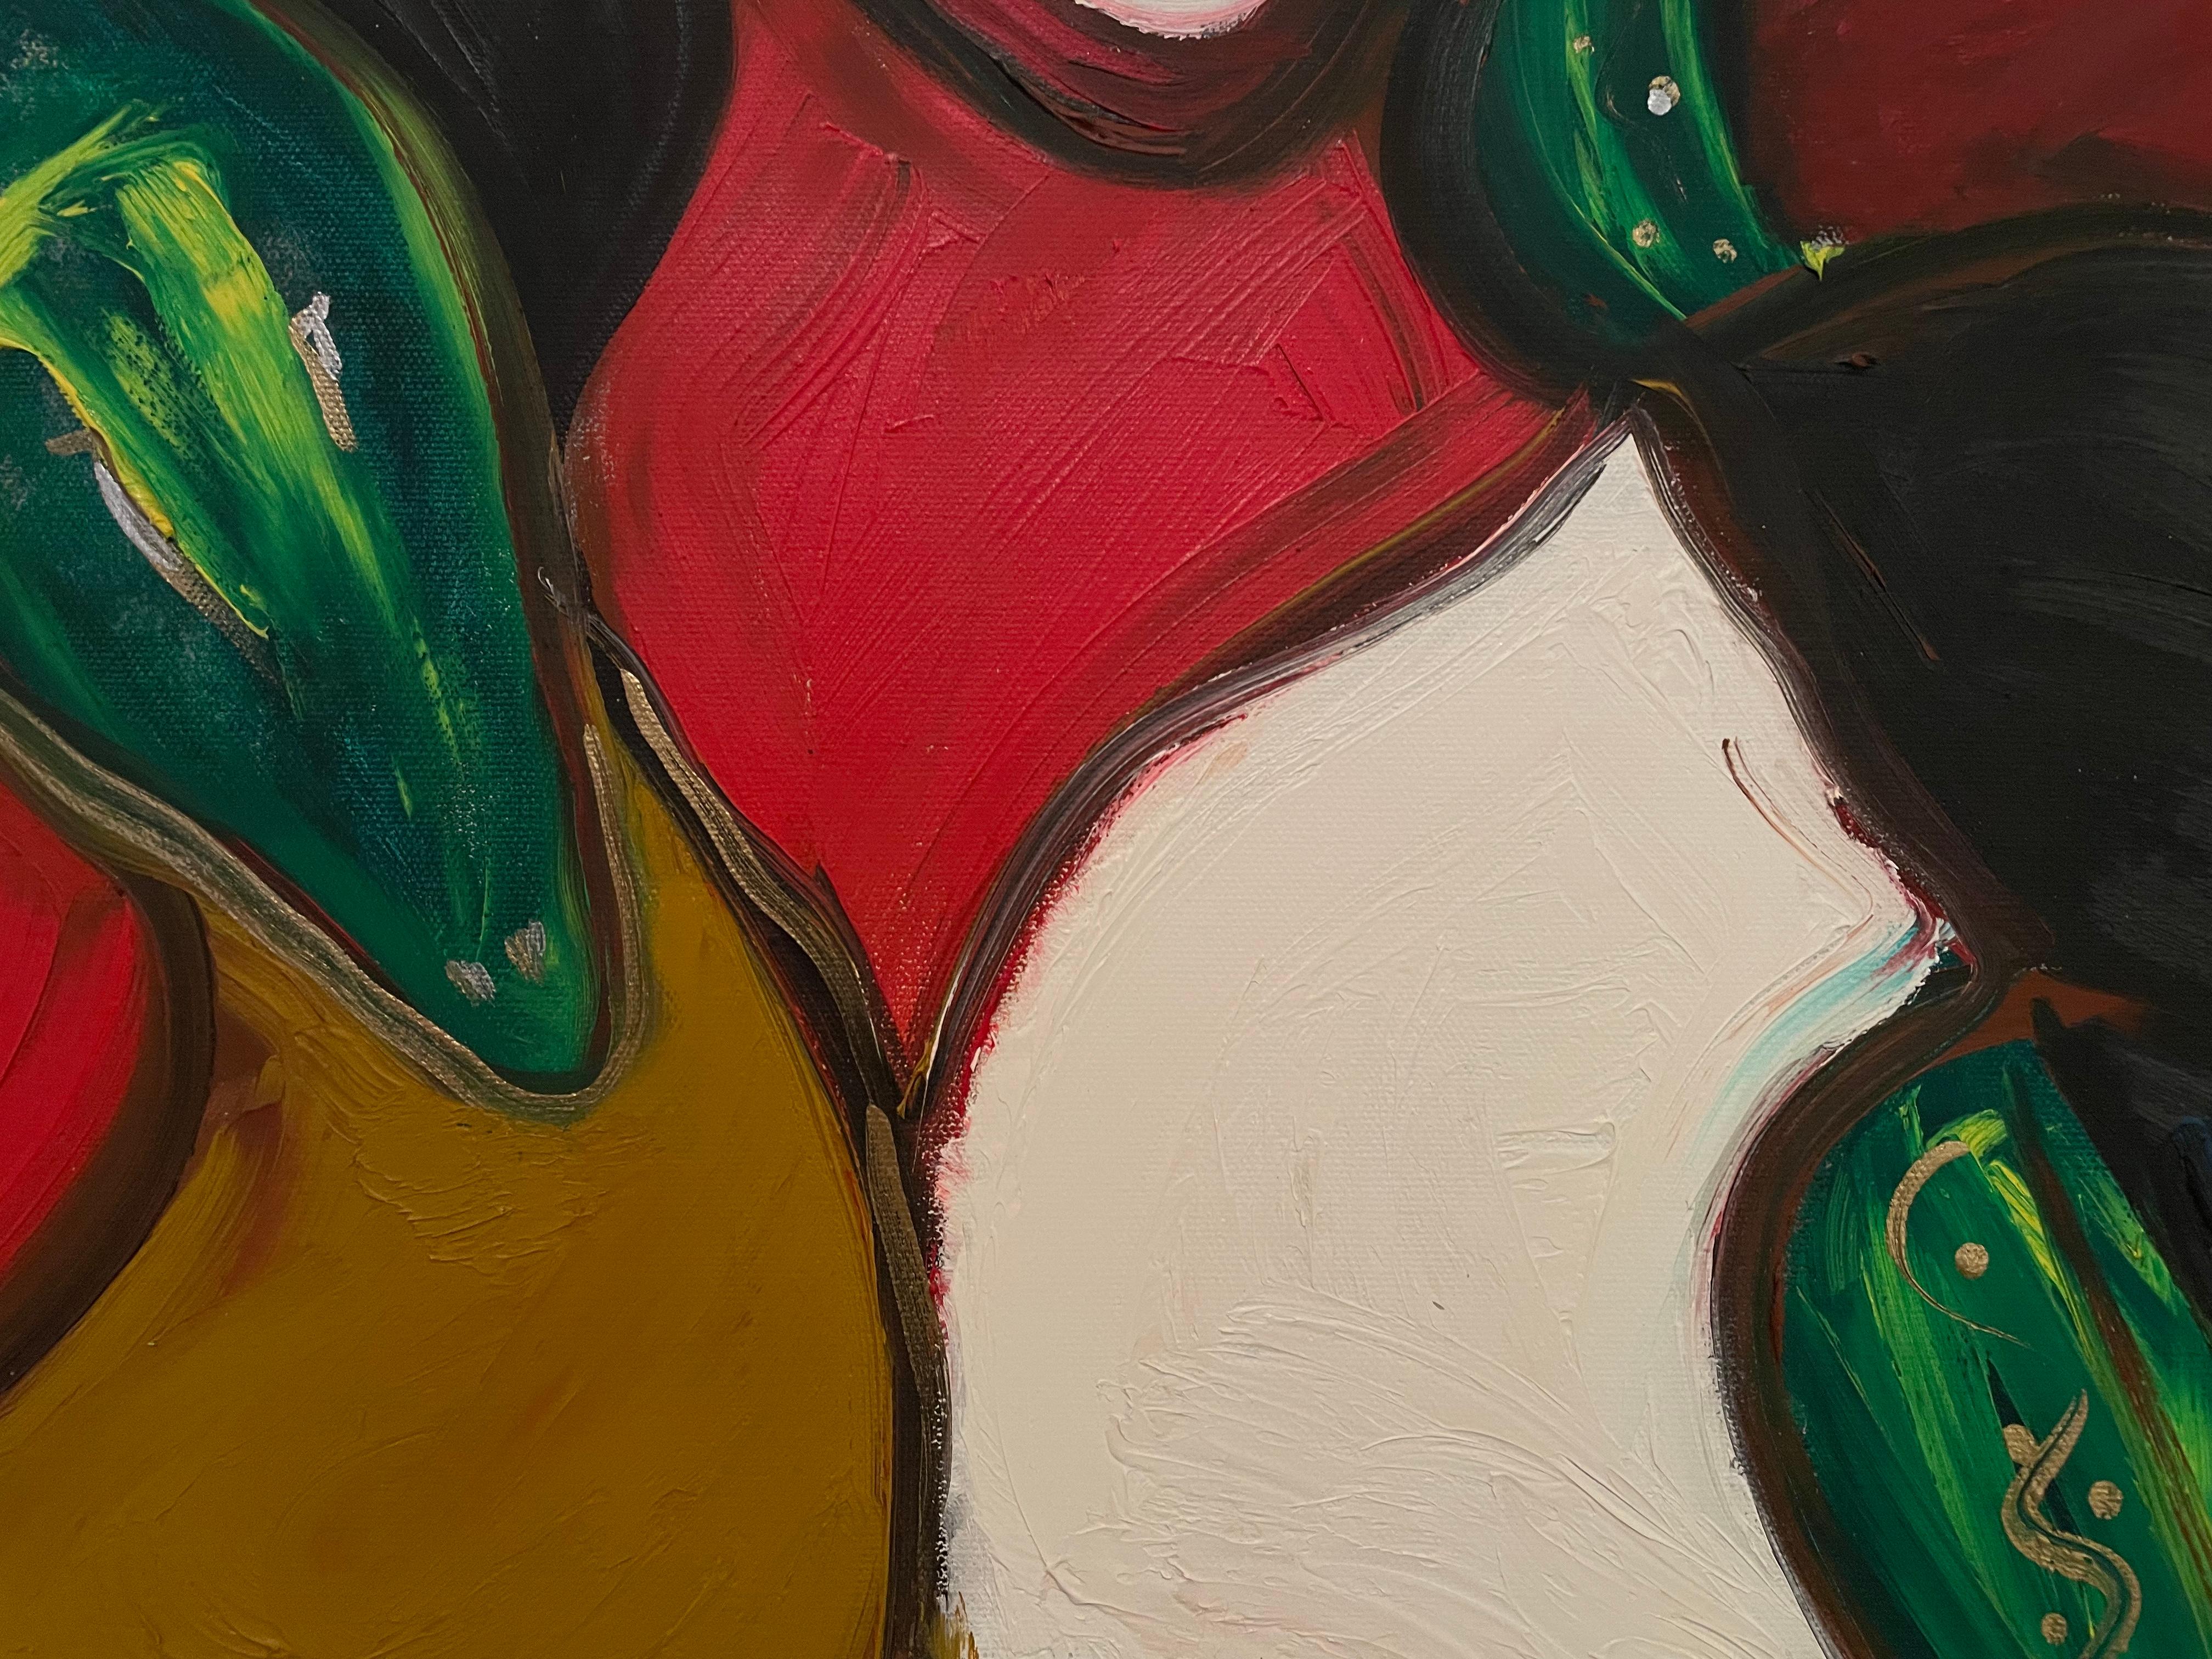 In 'Madame,' sister piece of 'The Queen,' Frida Willis ventures again into the realm of contemporary figurative abstraction with breathtaking results. This striking masterpiece is a captivating exploration of the symbiotic relationship between